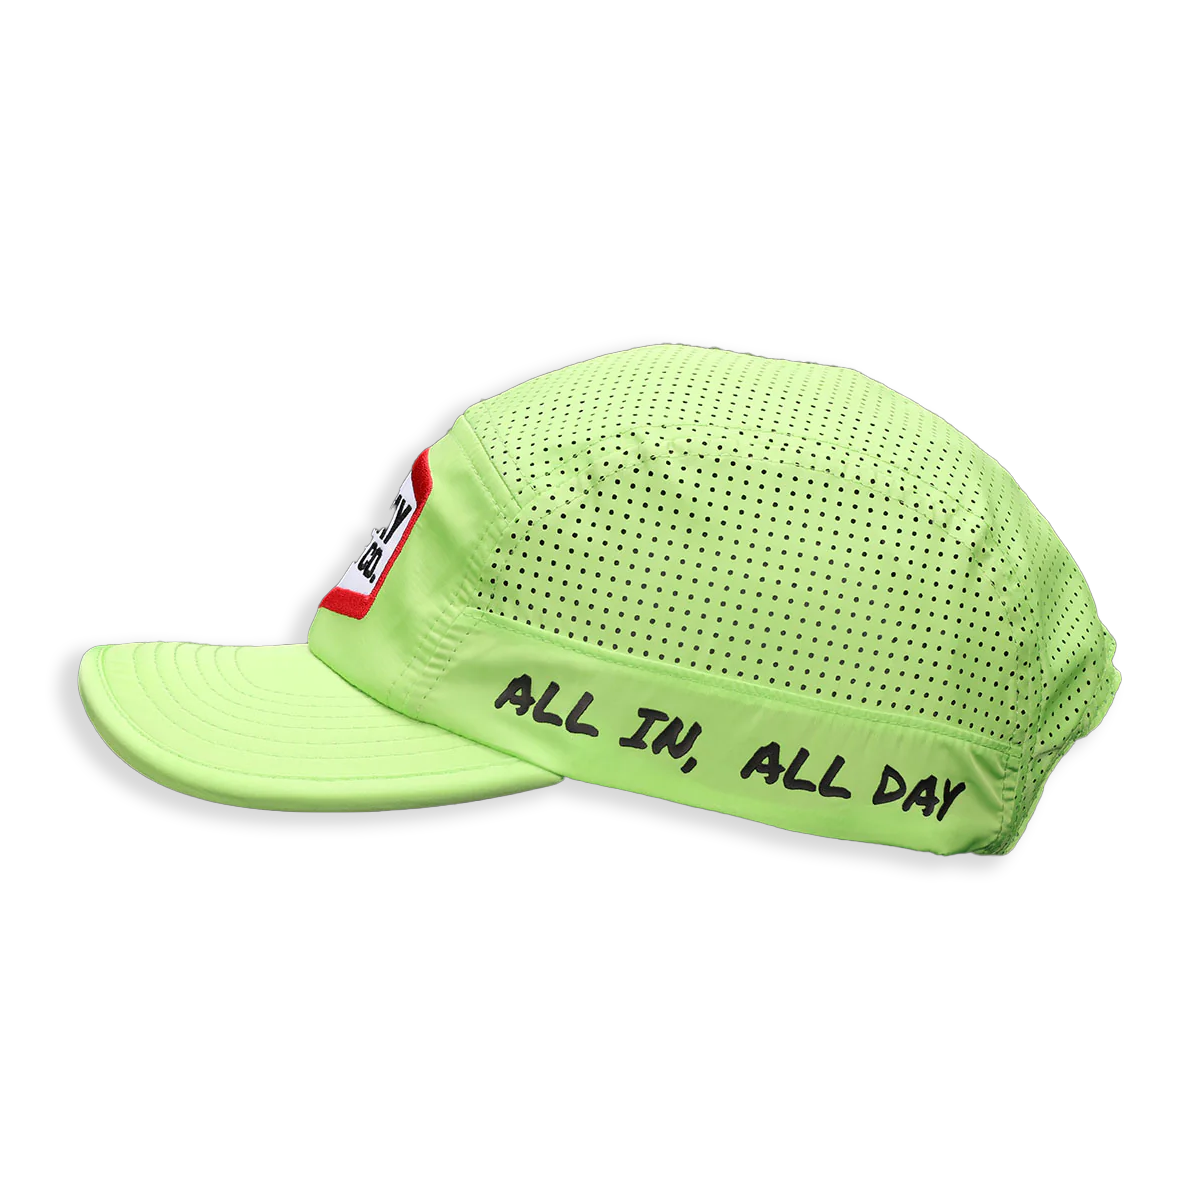 All Day Team Hats